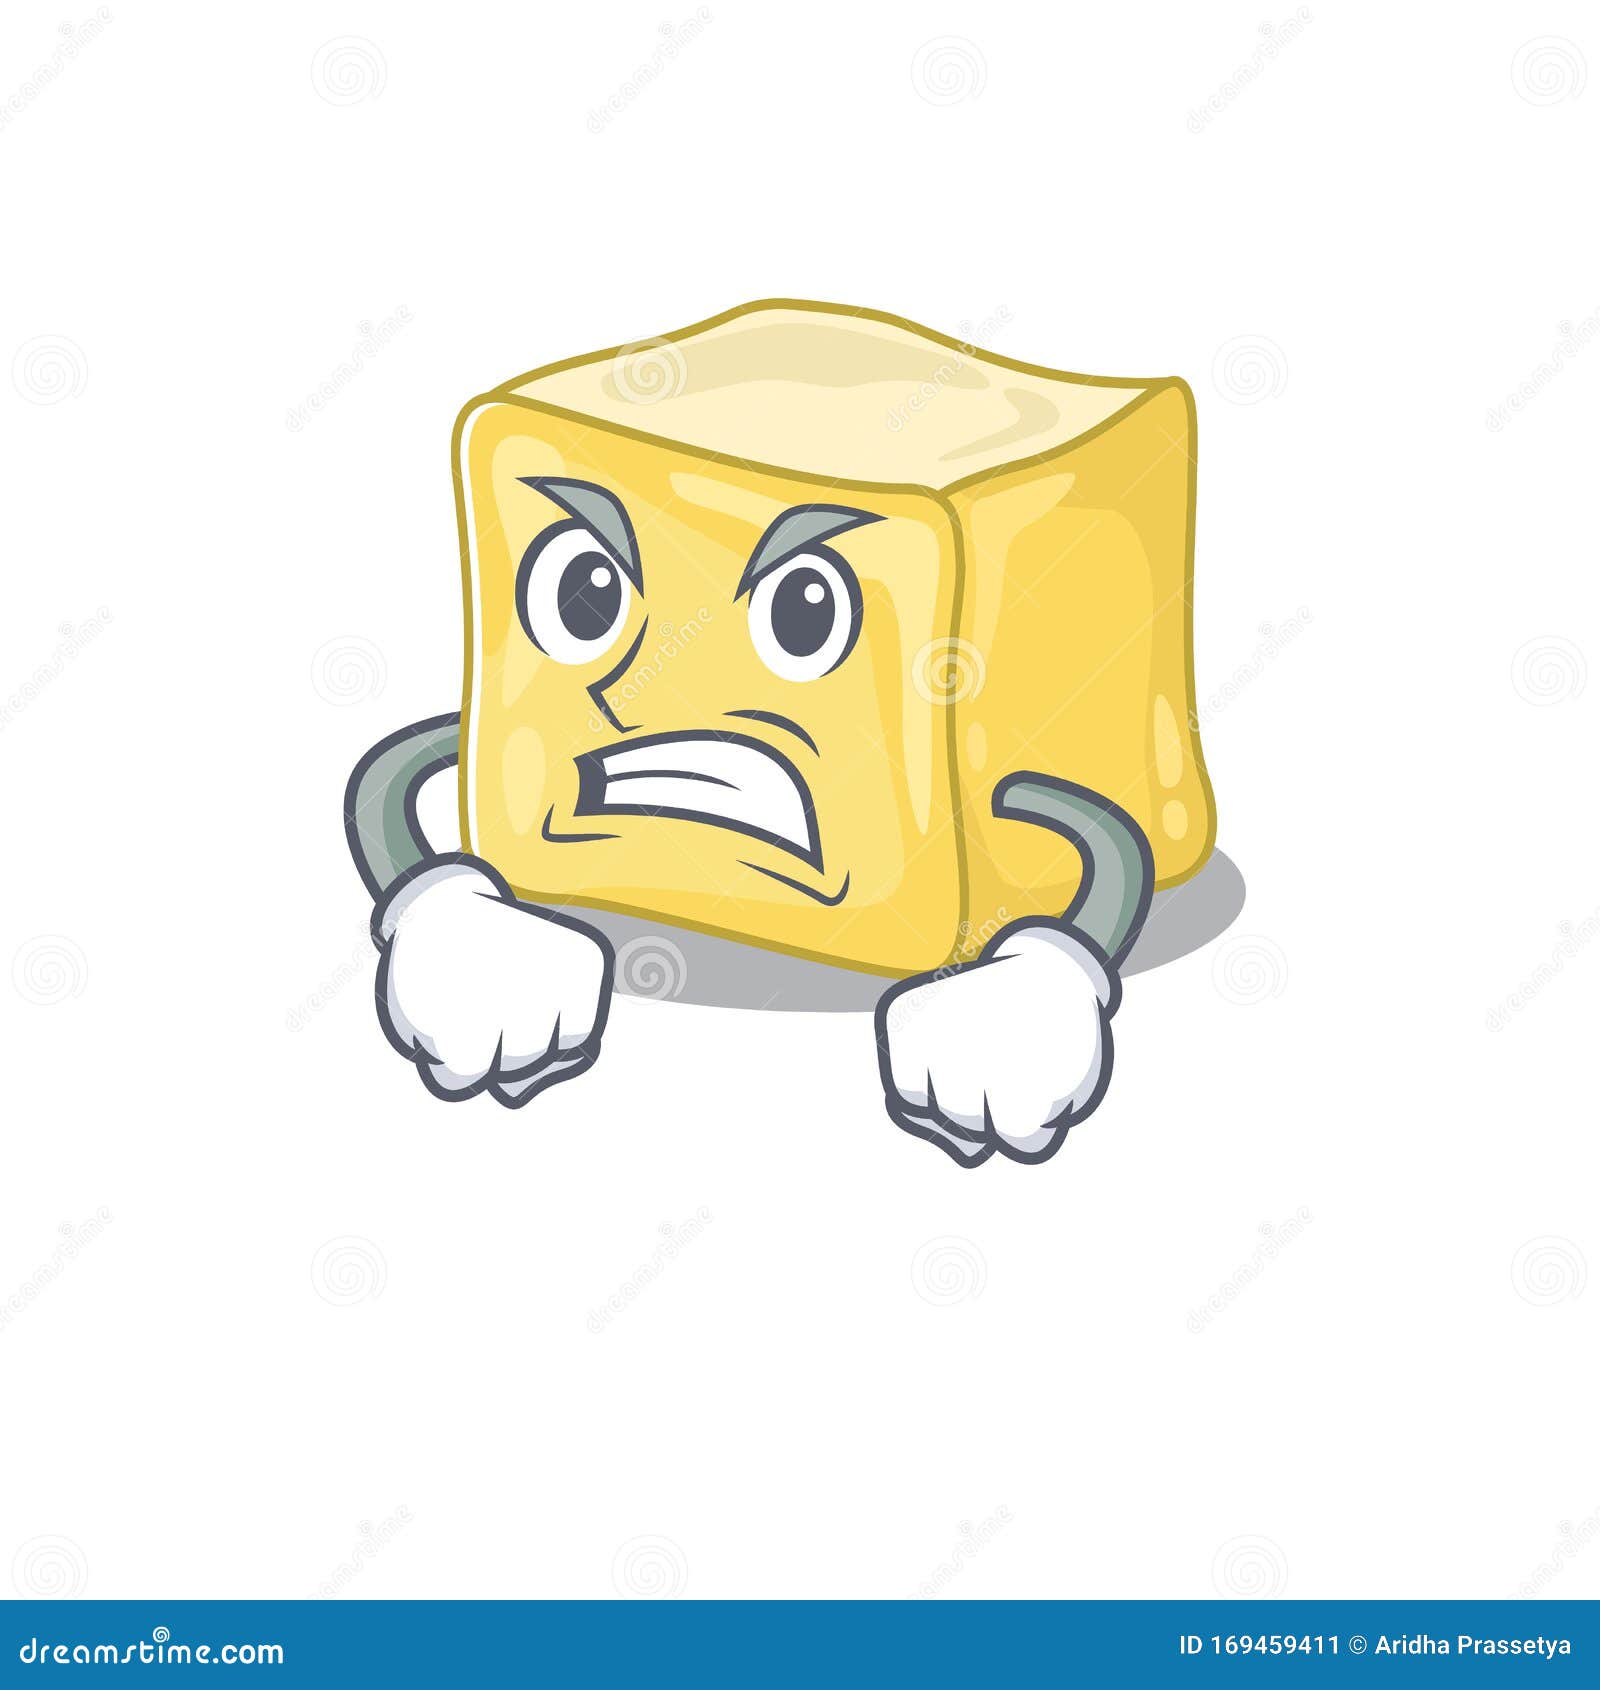 Creamy Butter Cartoon Character Design Having Angry Face Stock Vector -  Illustration of delicious, culinary: 169459411